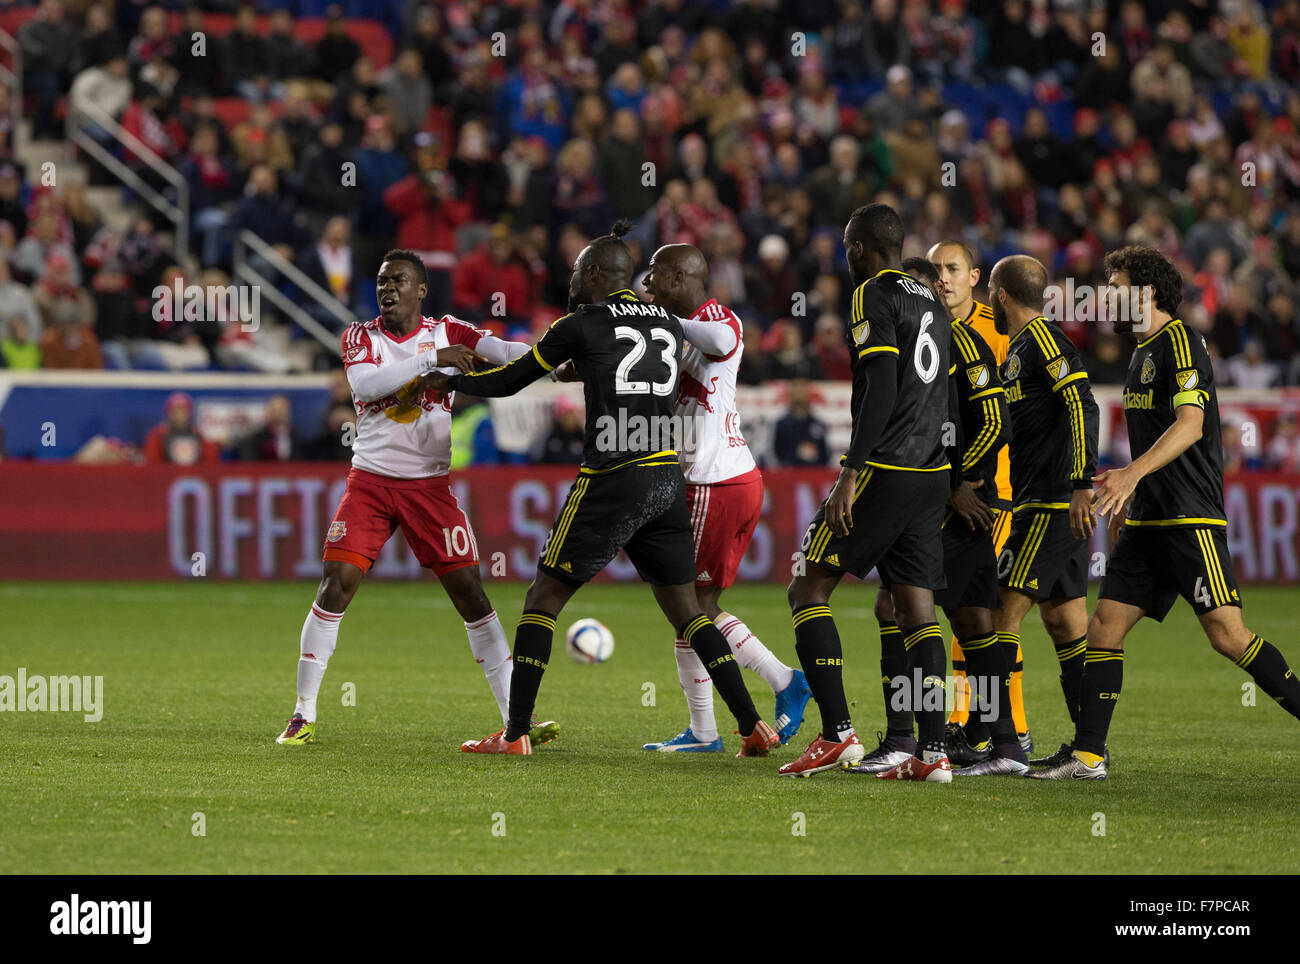 Harrison, NJ USA - November 29, 2015: Skirmish during MLS Eastern Conference Final between New York Red Bulls and Columbus Crew SC at Red Bulls Arena Stock Photo